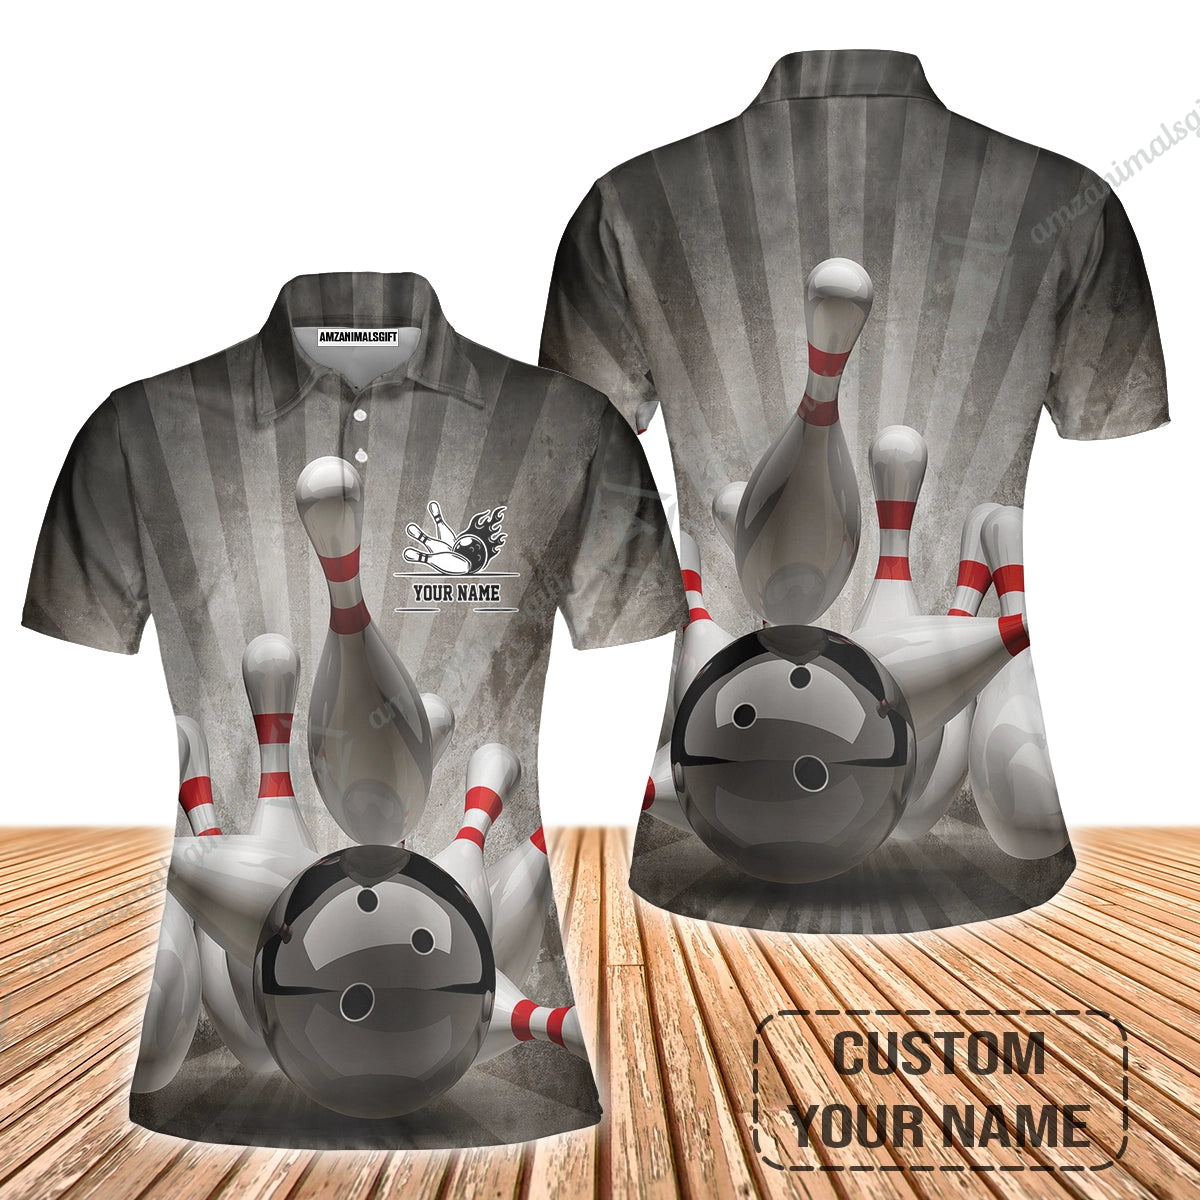 Customized Name Bowling Women Polo Shirt, Bowling Apparel For Men And Women, Bowling Team - Perfect Outfit For Bowling Lovers, Bowlers